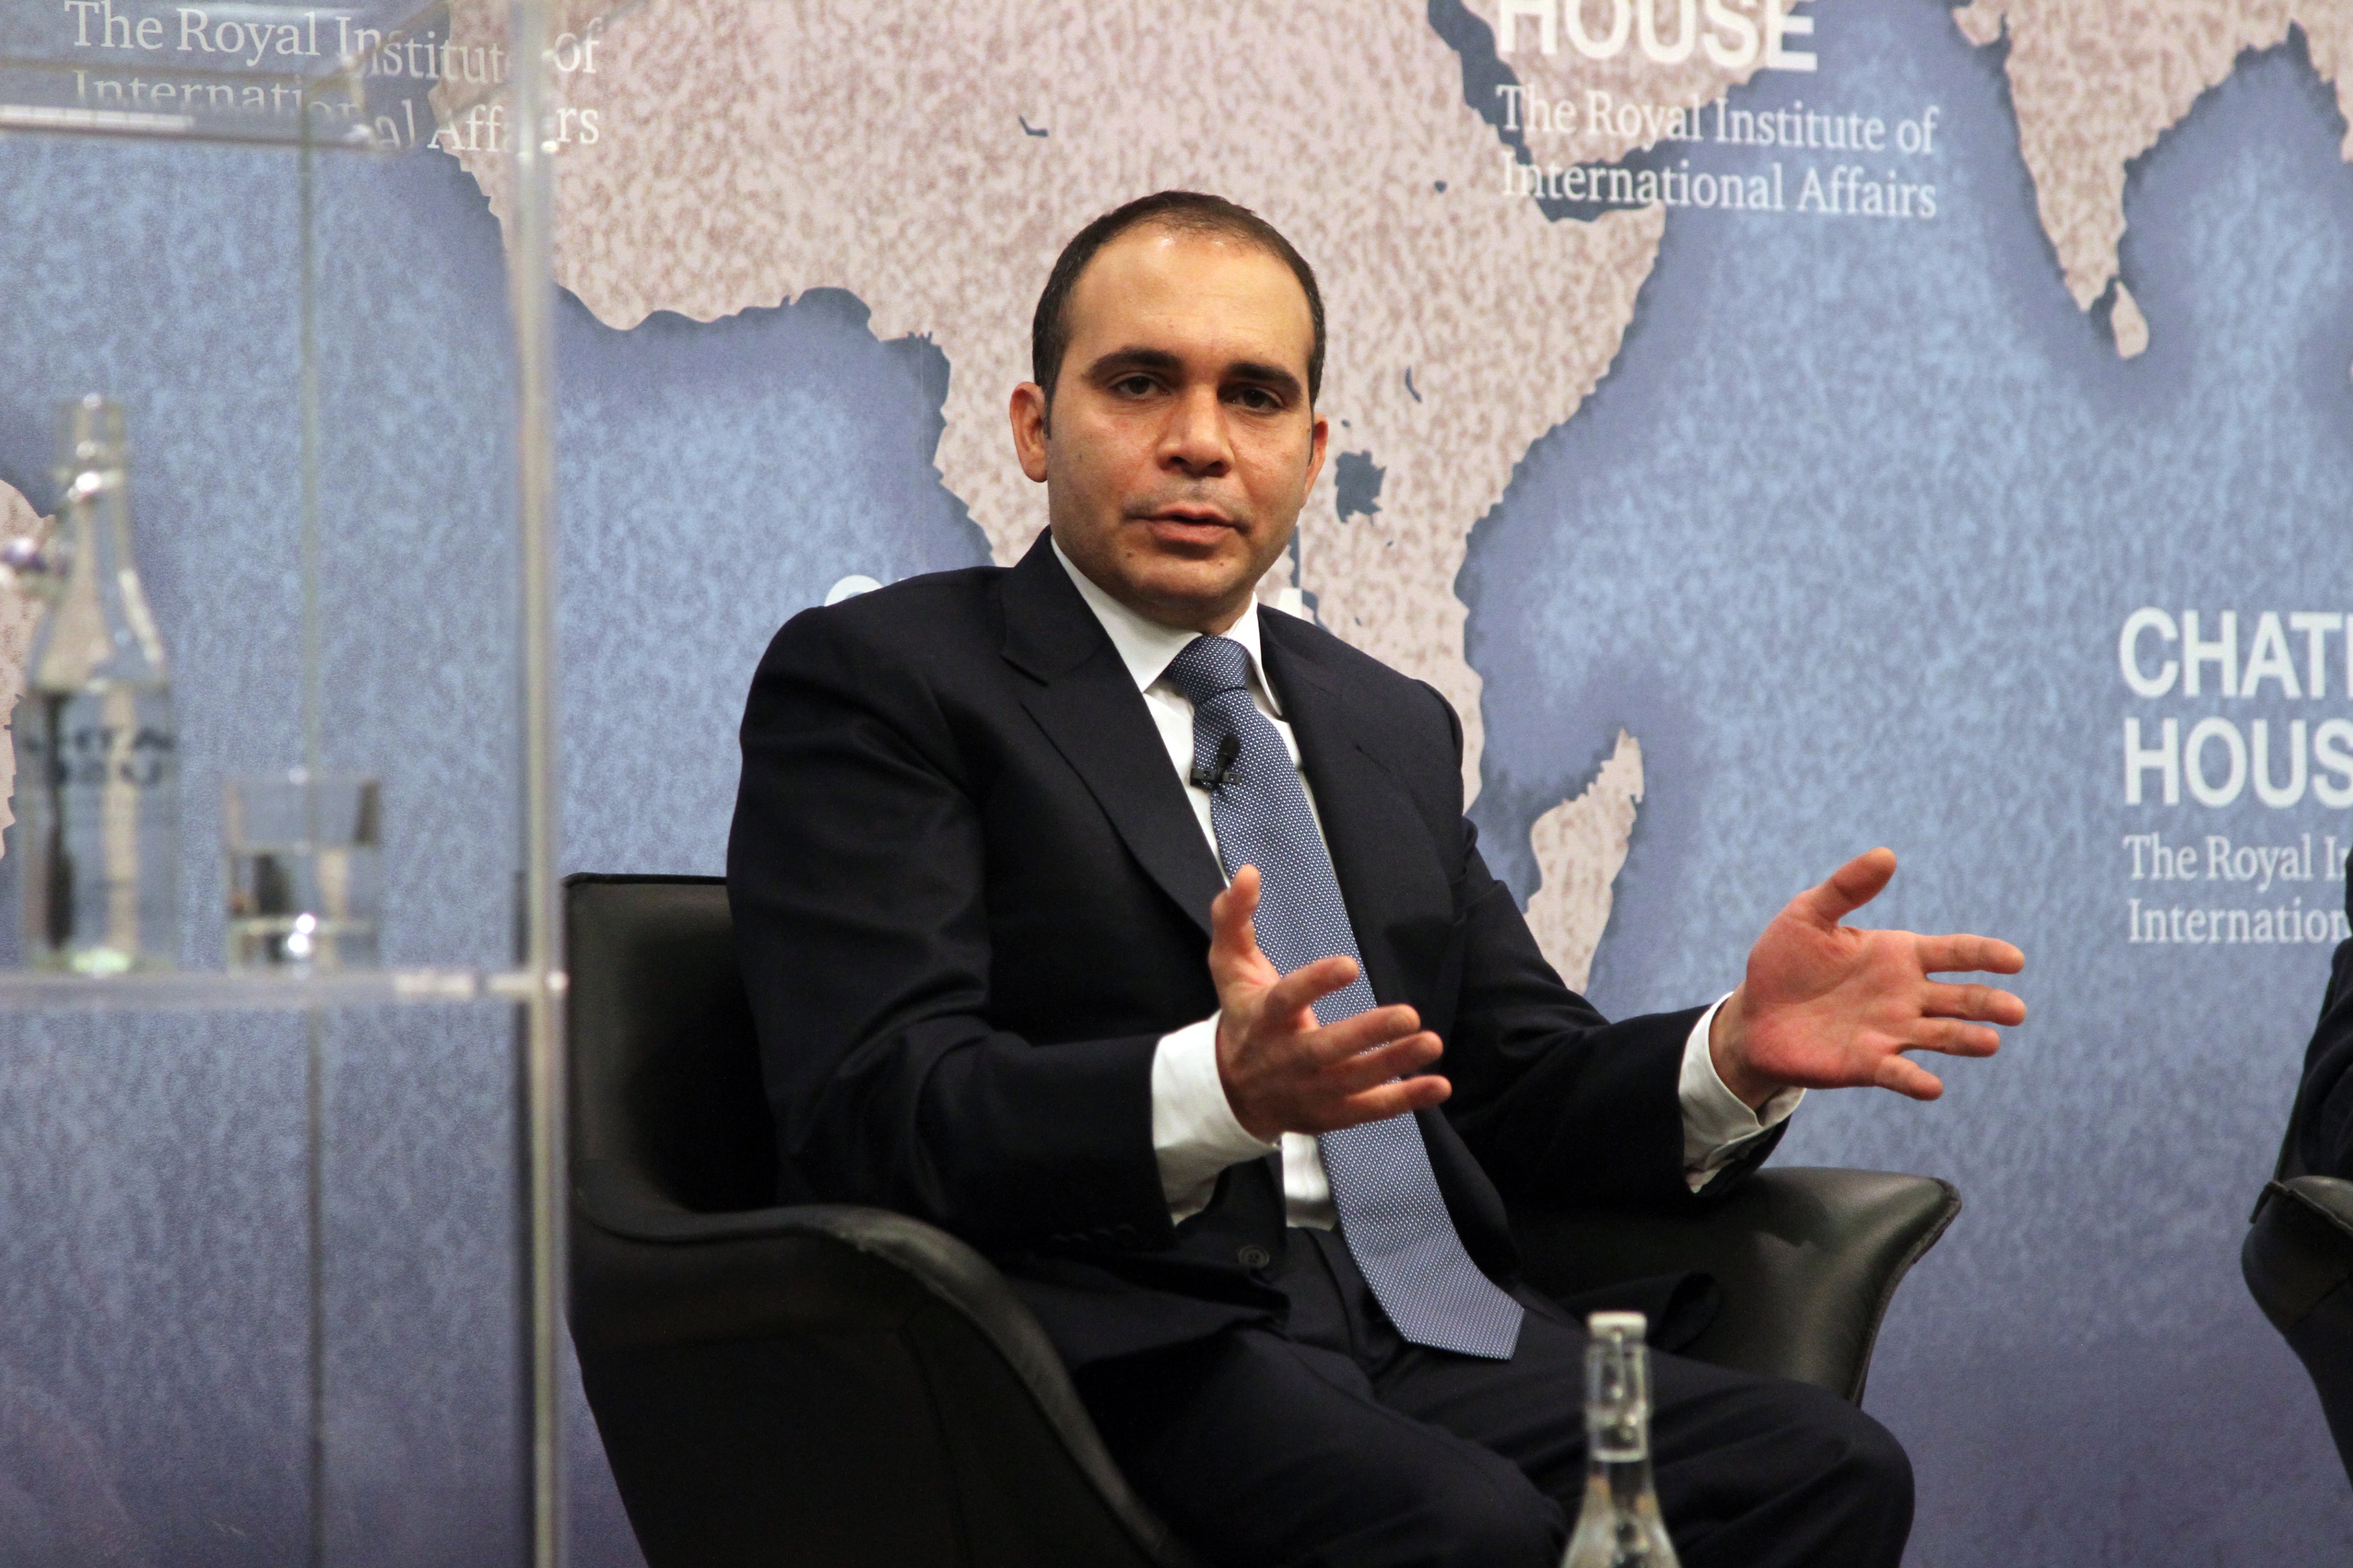 Prince Ali Bin Al Hussein of Jordan vows to root out corruption at footballs governing body, in a speech at Chatham House as part of his bid to become president of FIFA. (Pacific Press—LightRocket via Getty Images)